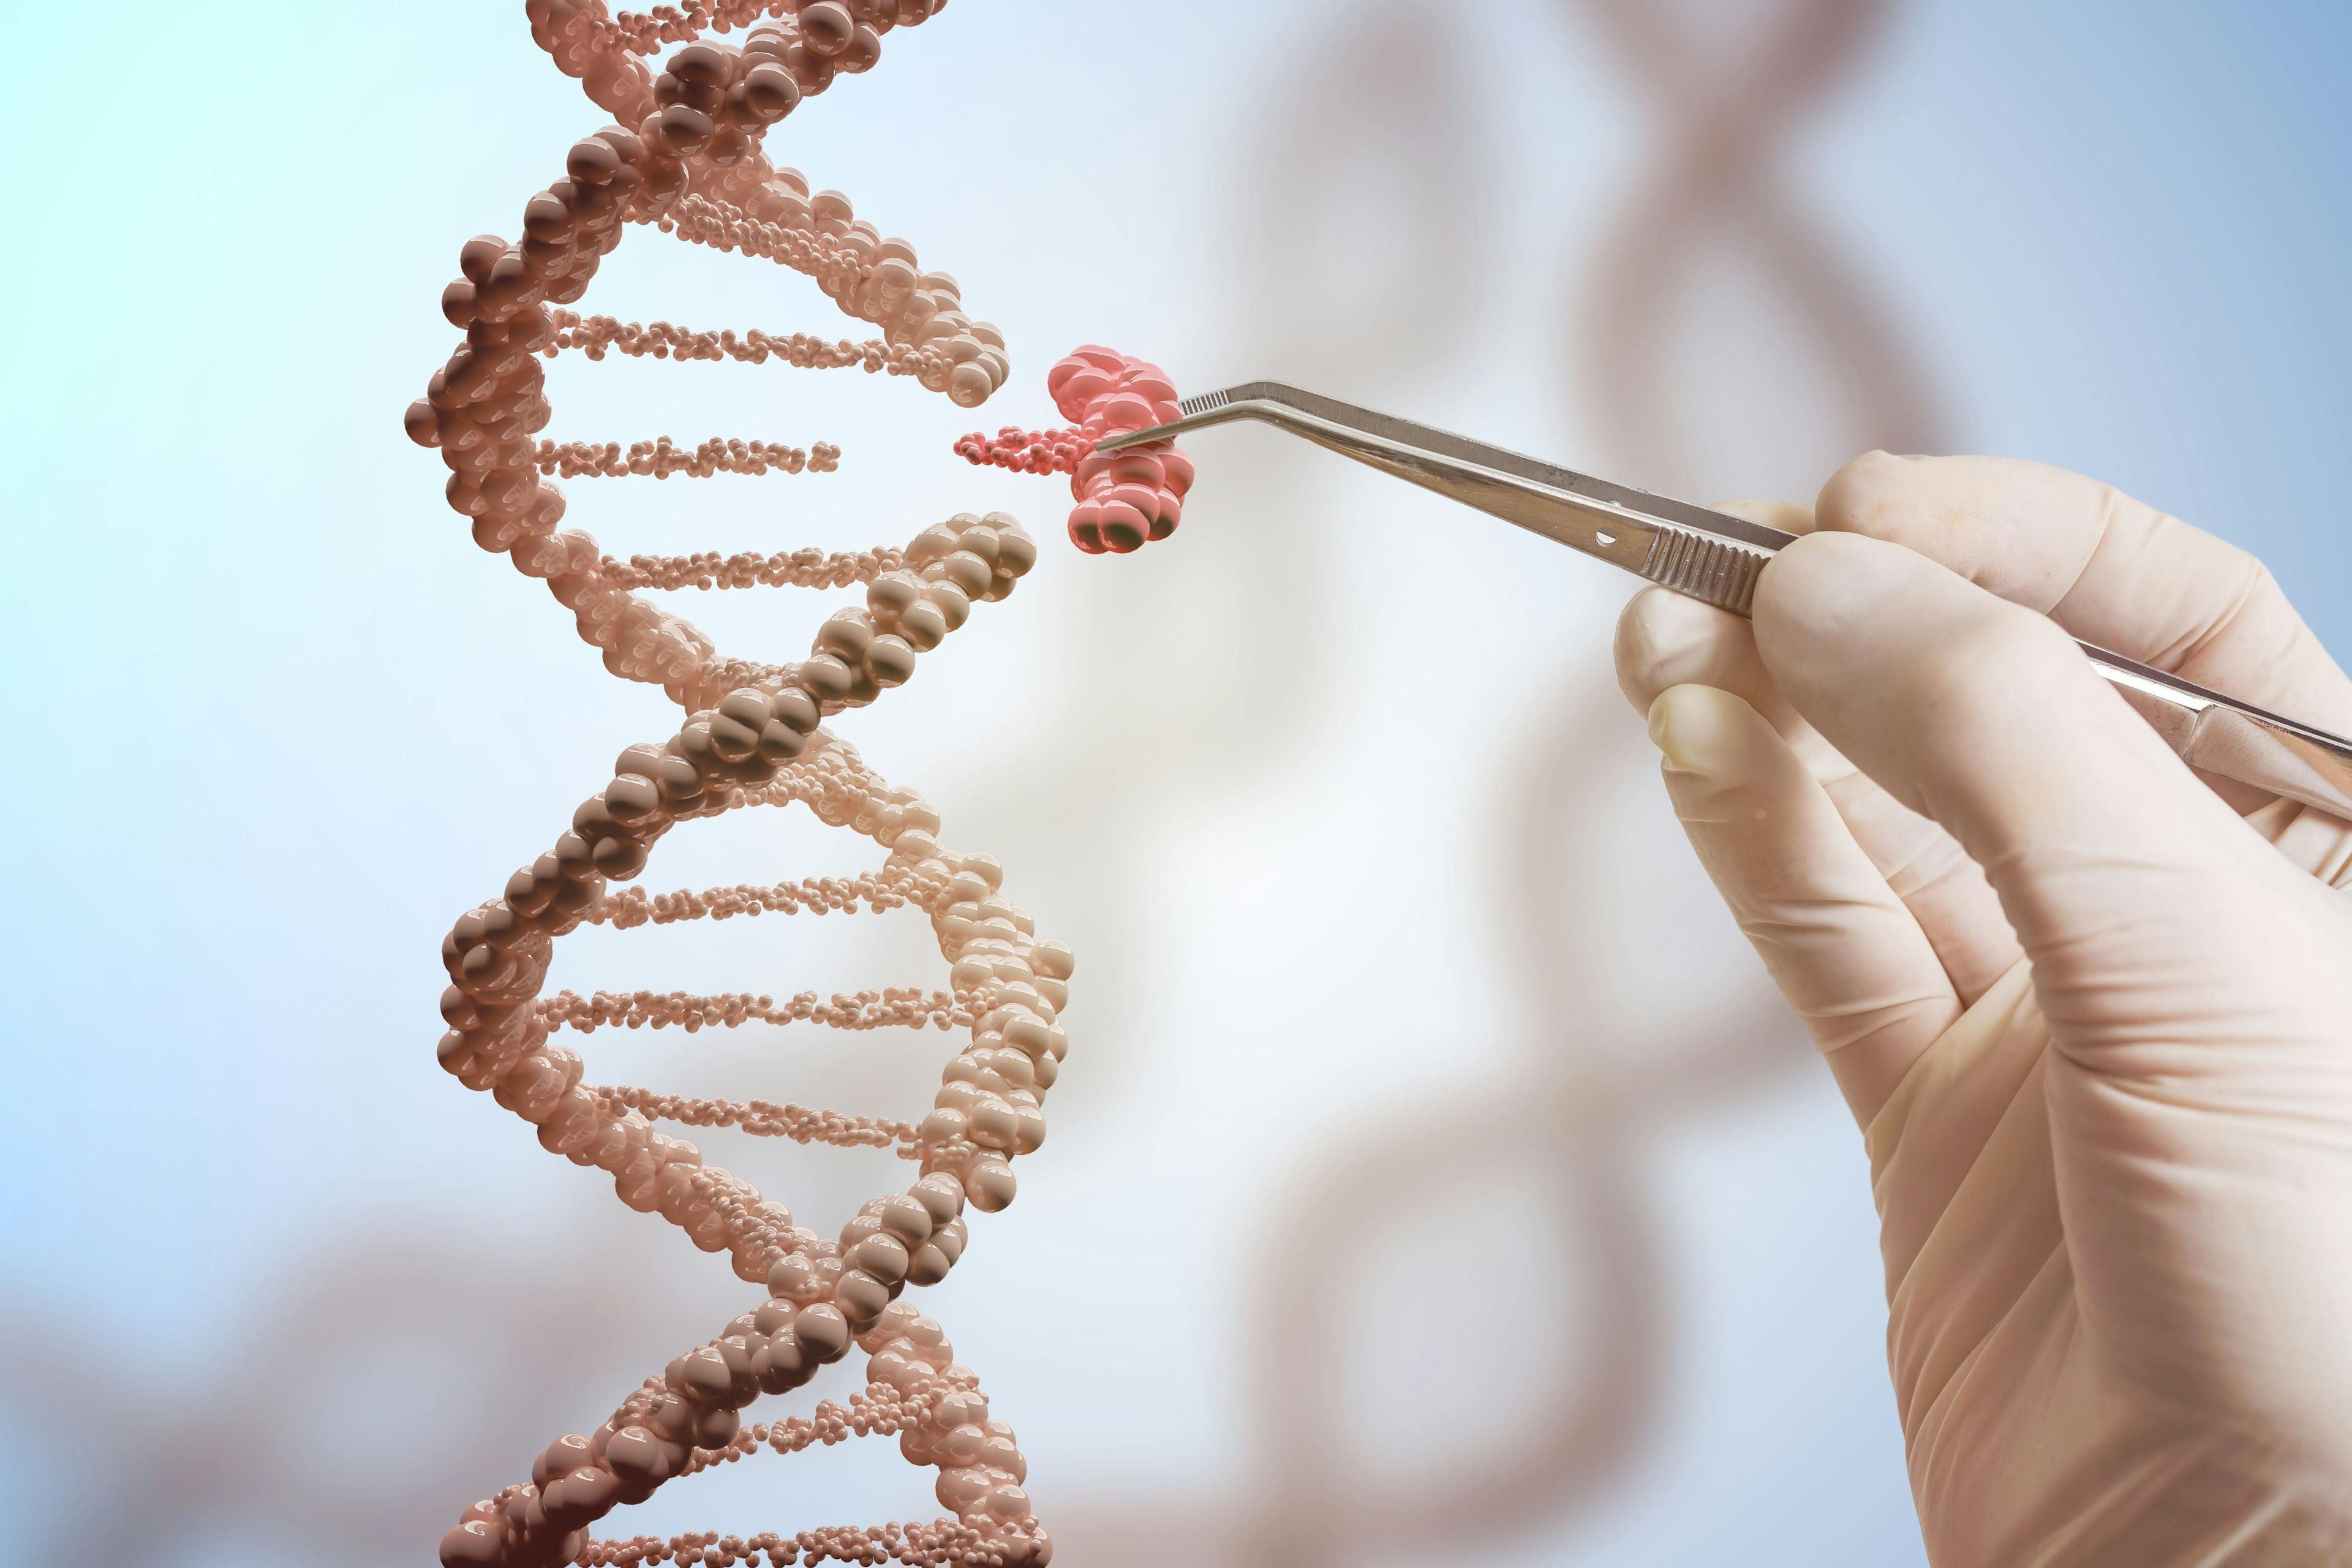 Genetic engineering and gene manipulation concept. Hand is replacing part of a DNA molecule. | Image Credit: © vchalup - stock.adobe.com